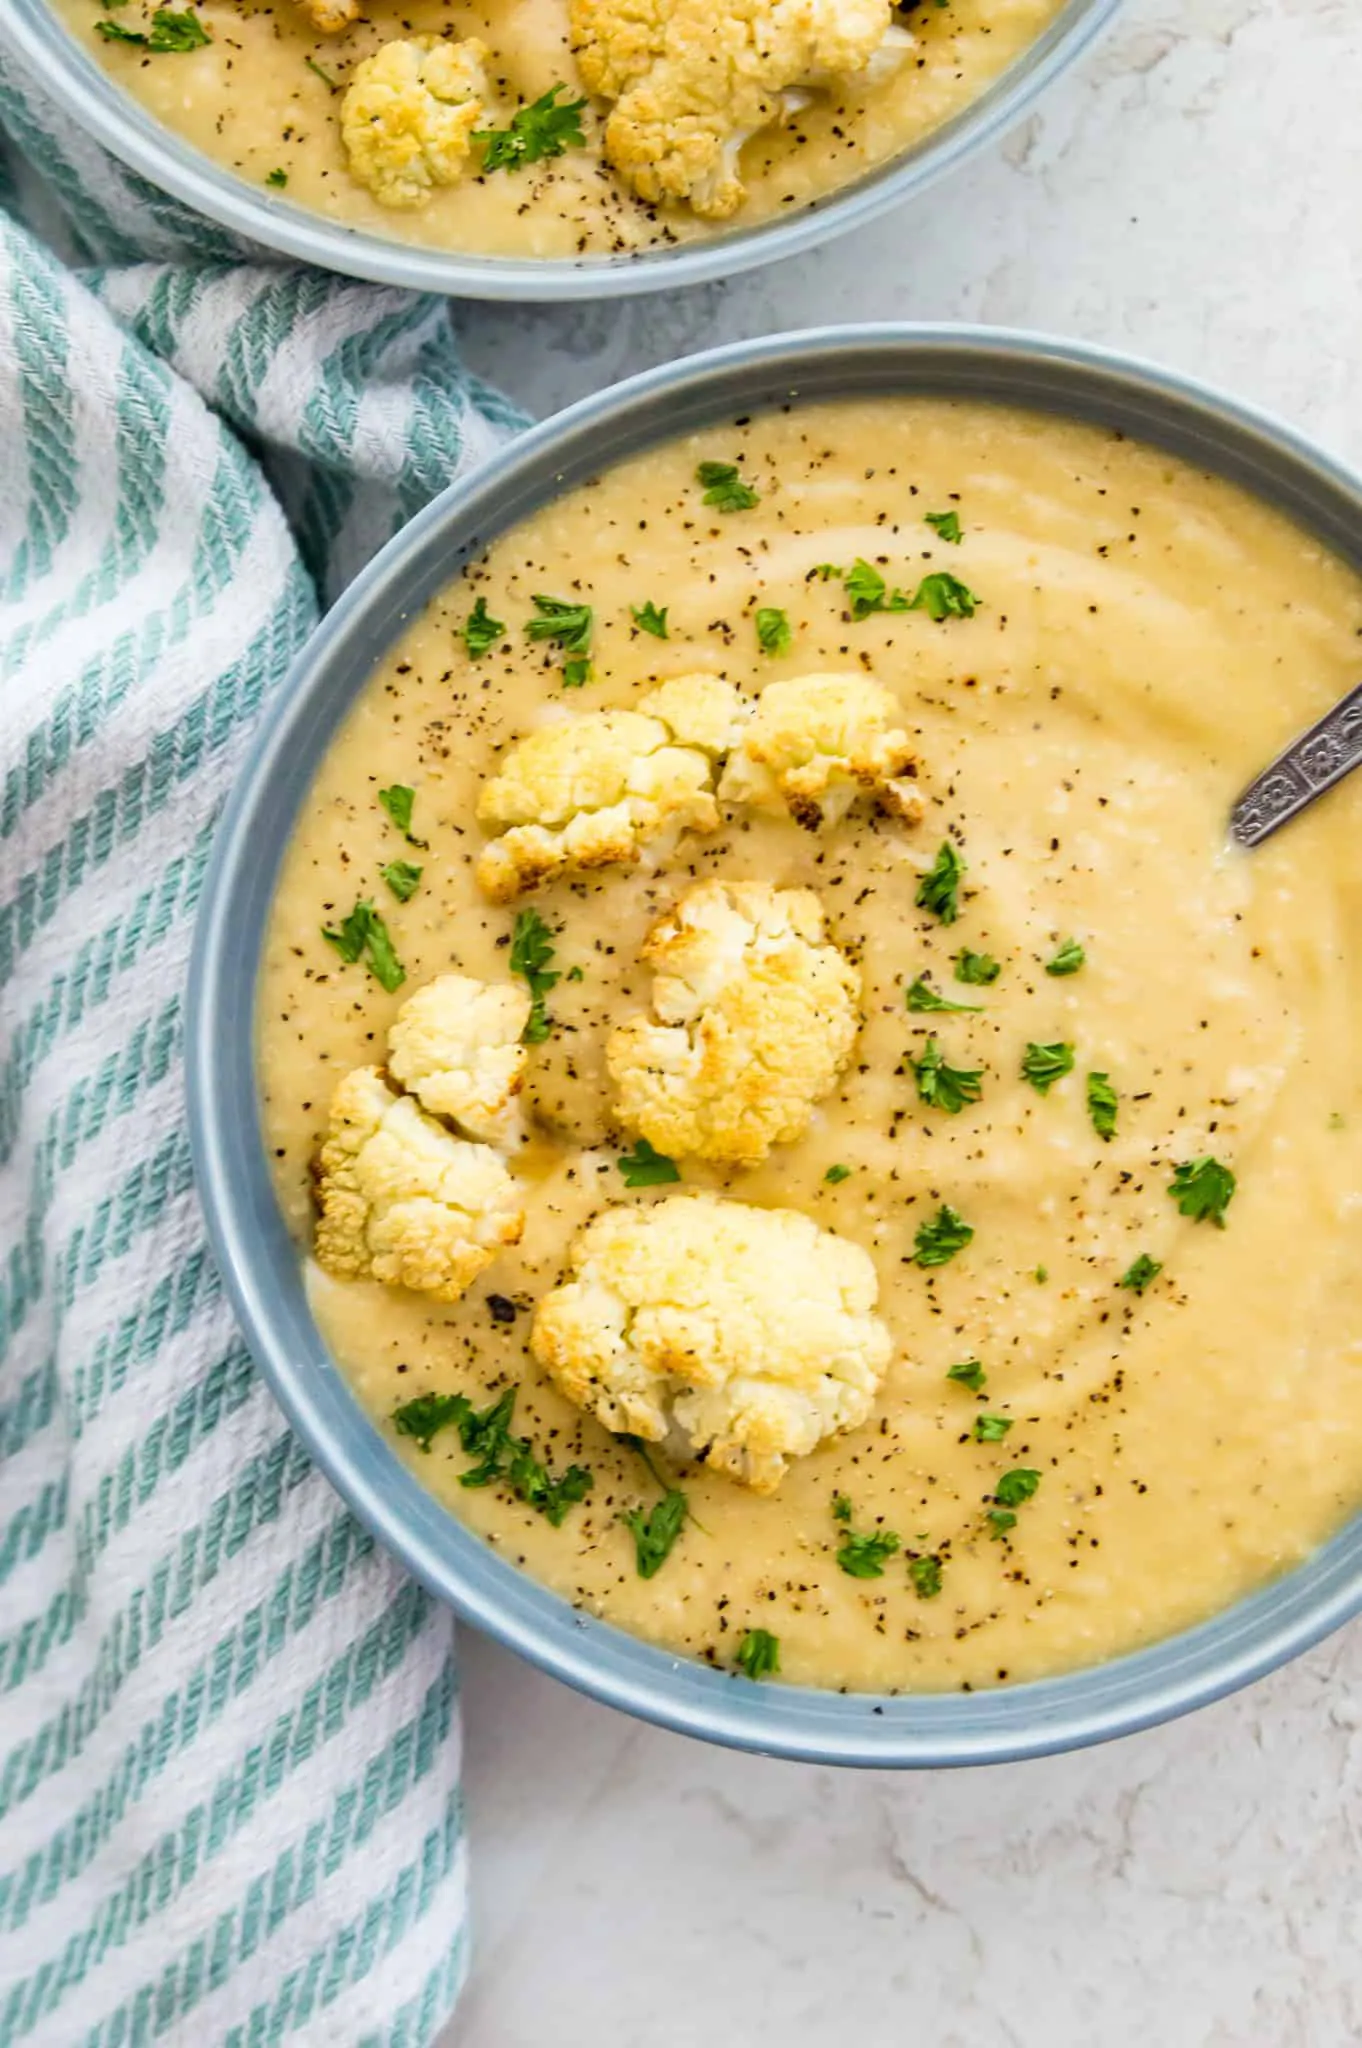 A bowl of Whole30 cauliflower soup garnished with parsley and roasted cauliflower